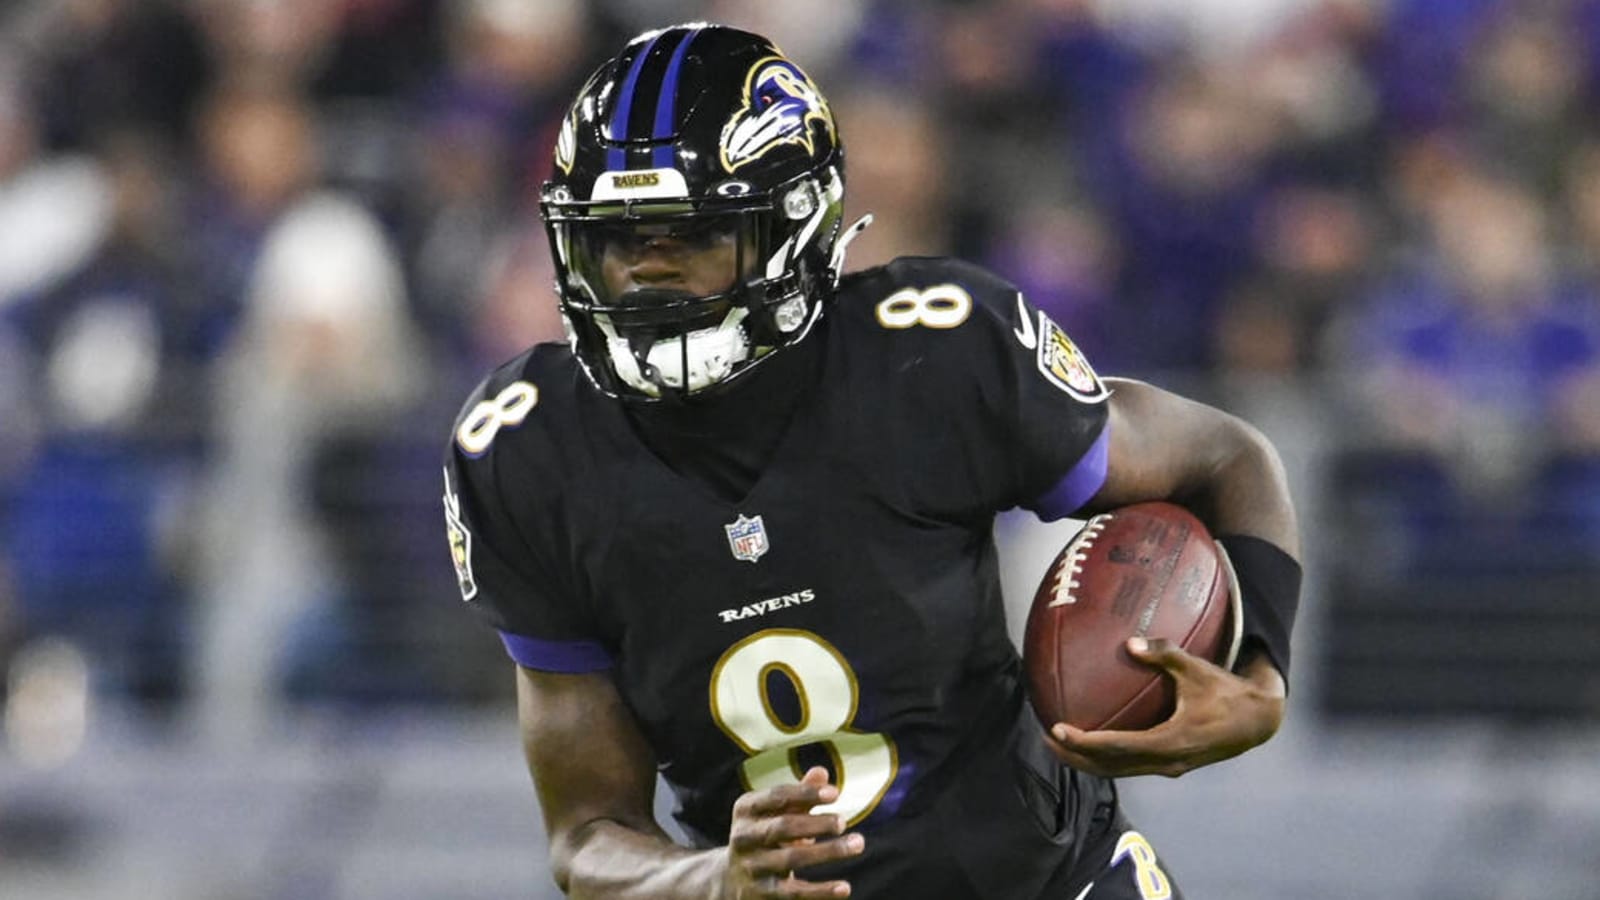 Ravens tired of calling Lamar Jackson about extension?